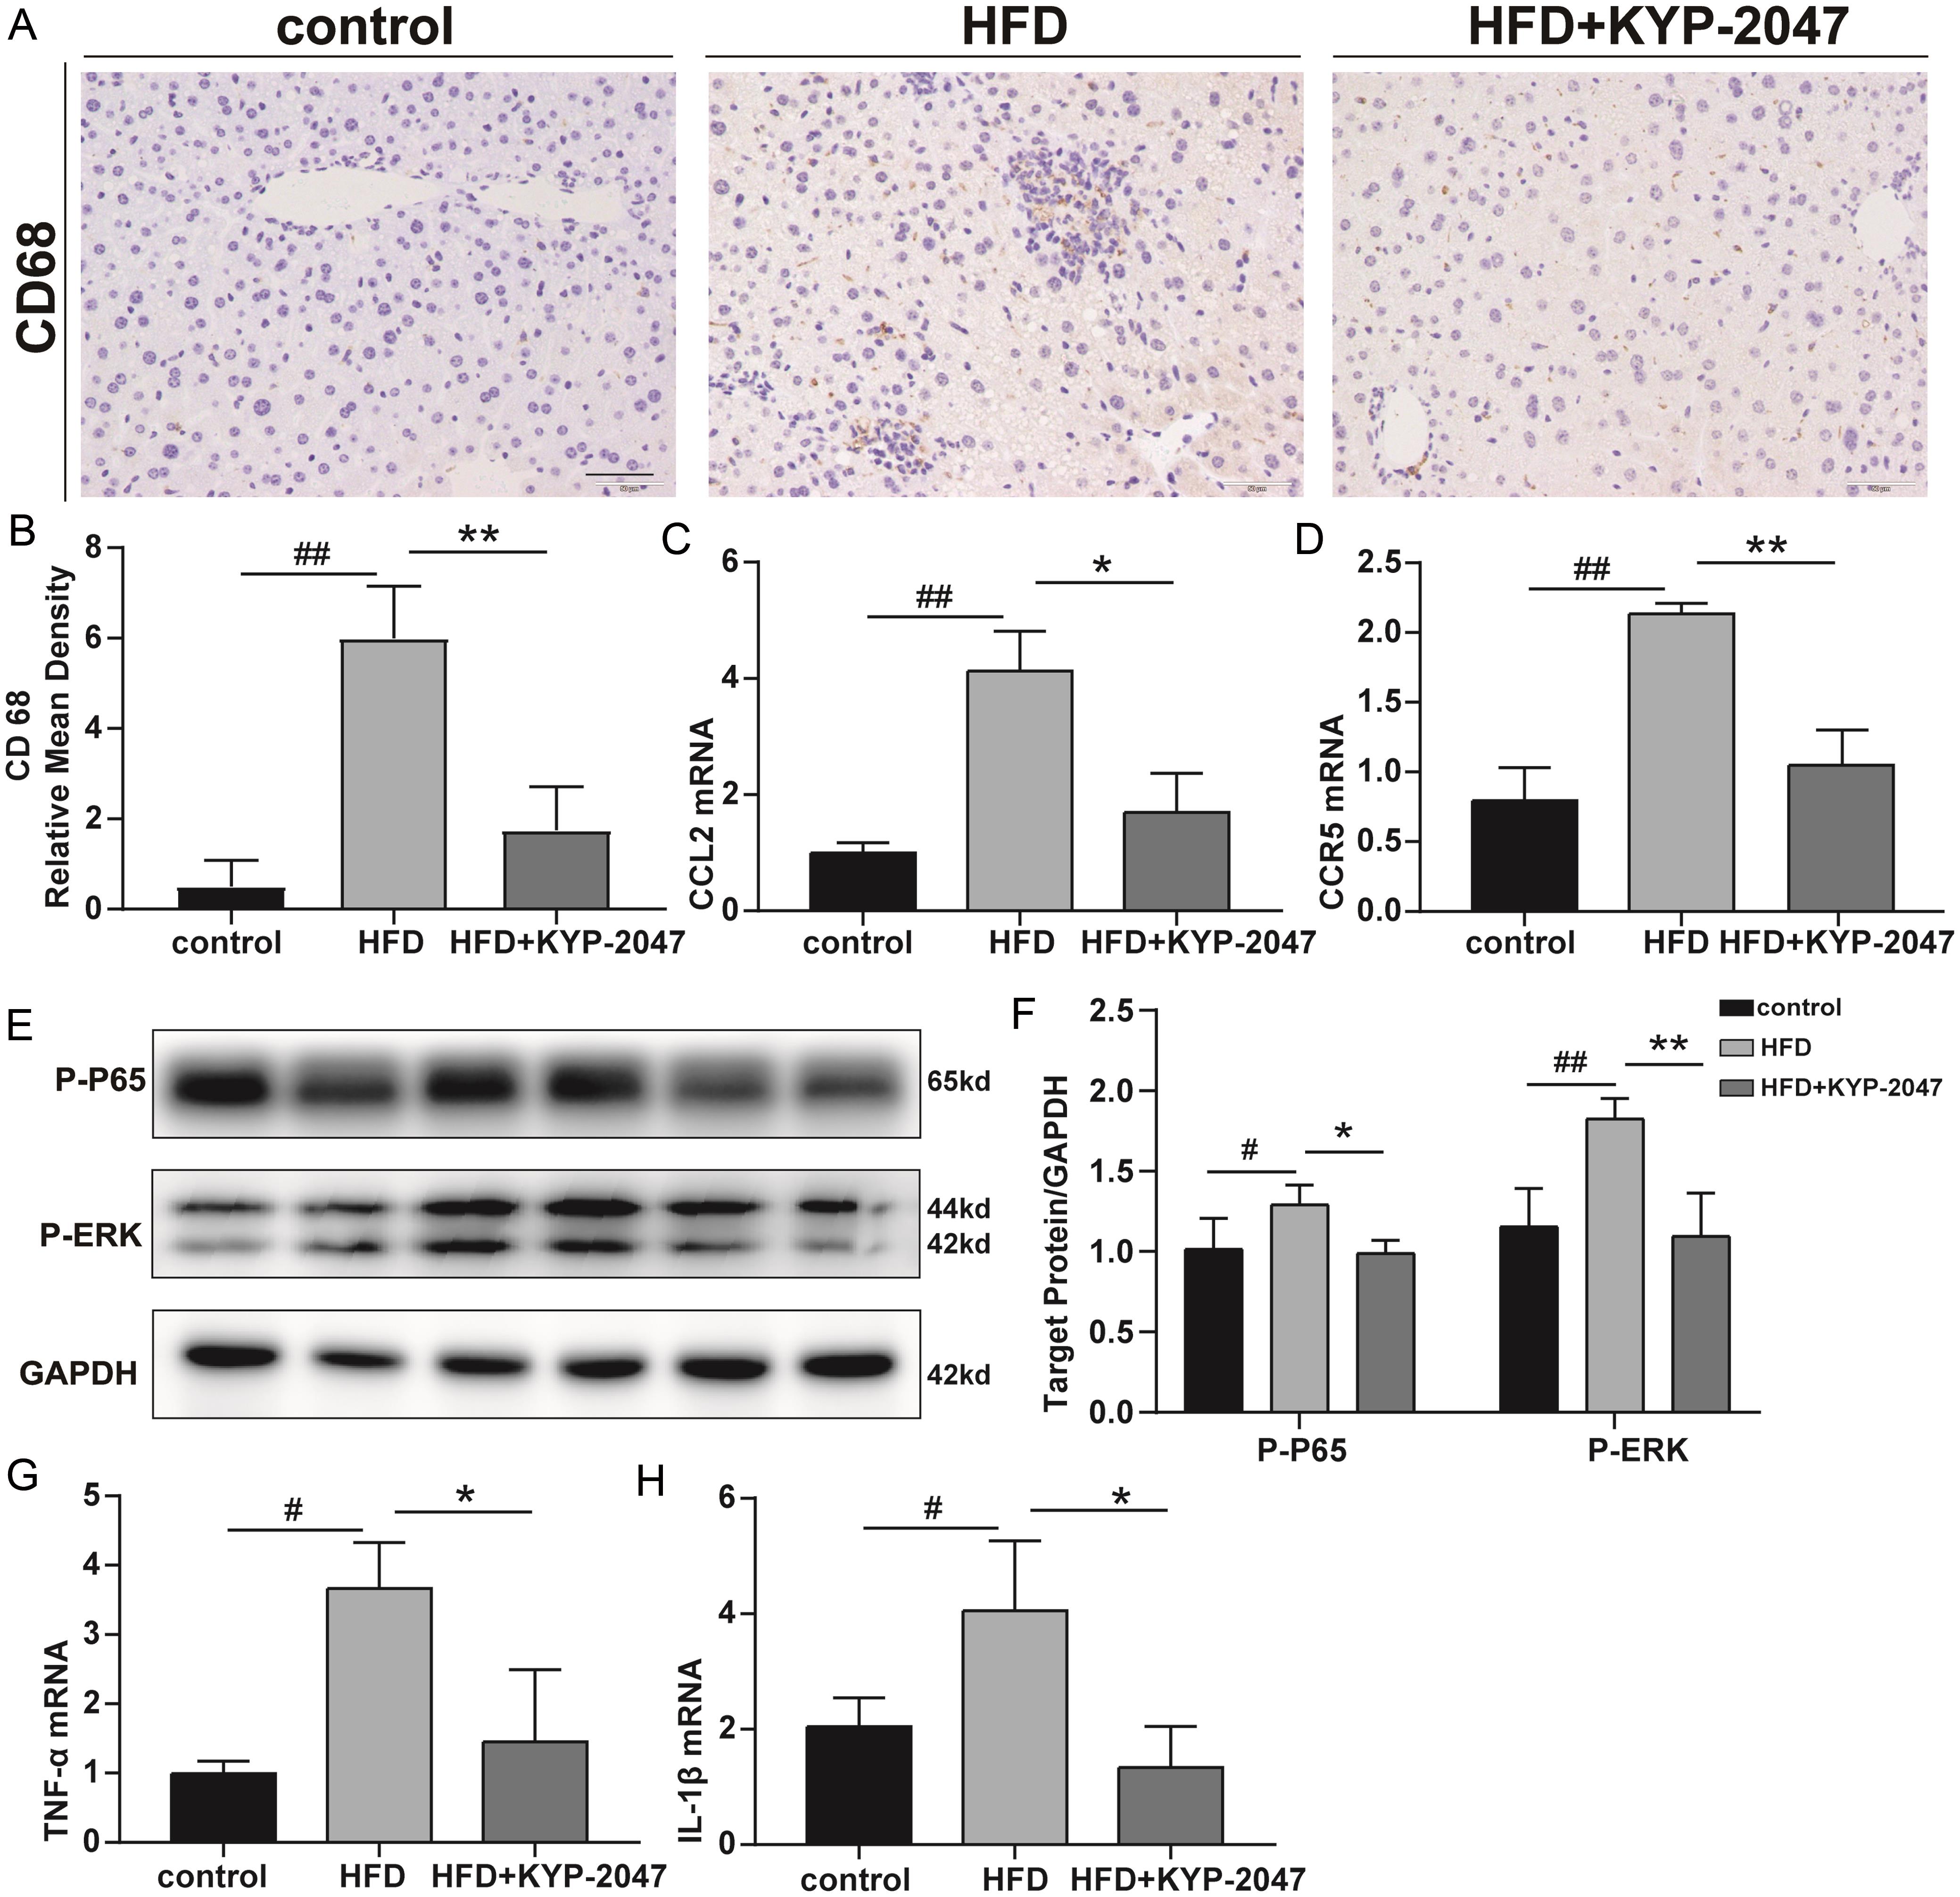 PREP inhibitor reduced hepatic macrophage accumulation and inflammation.